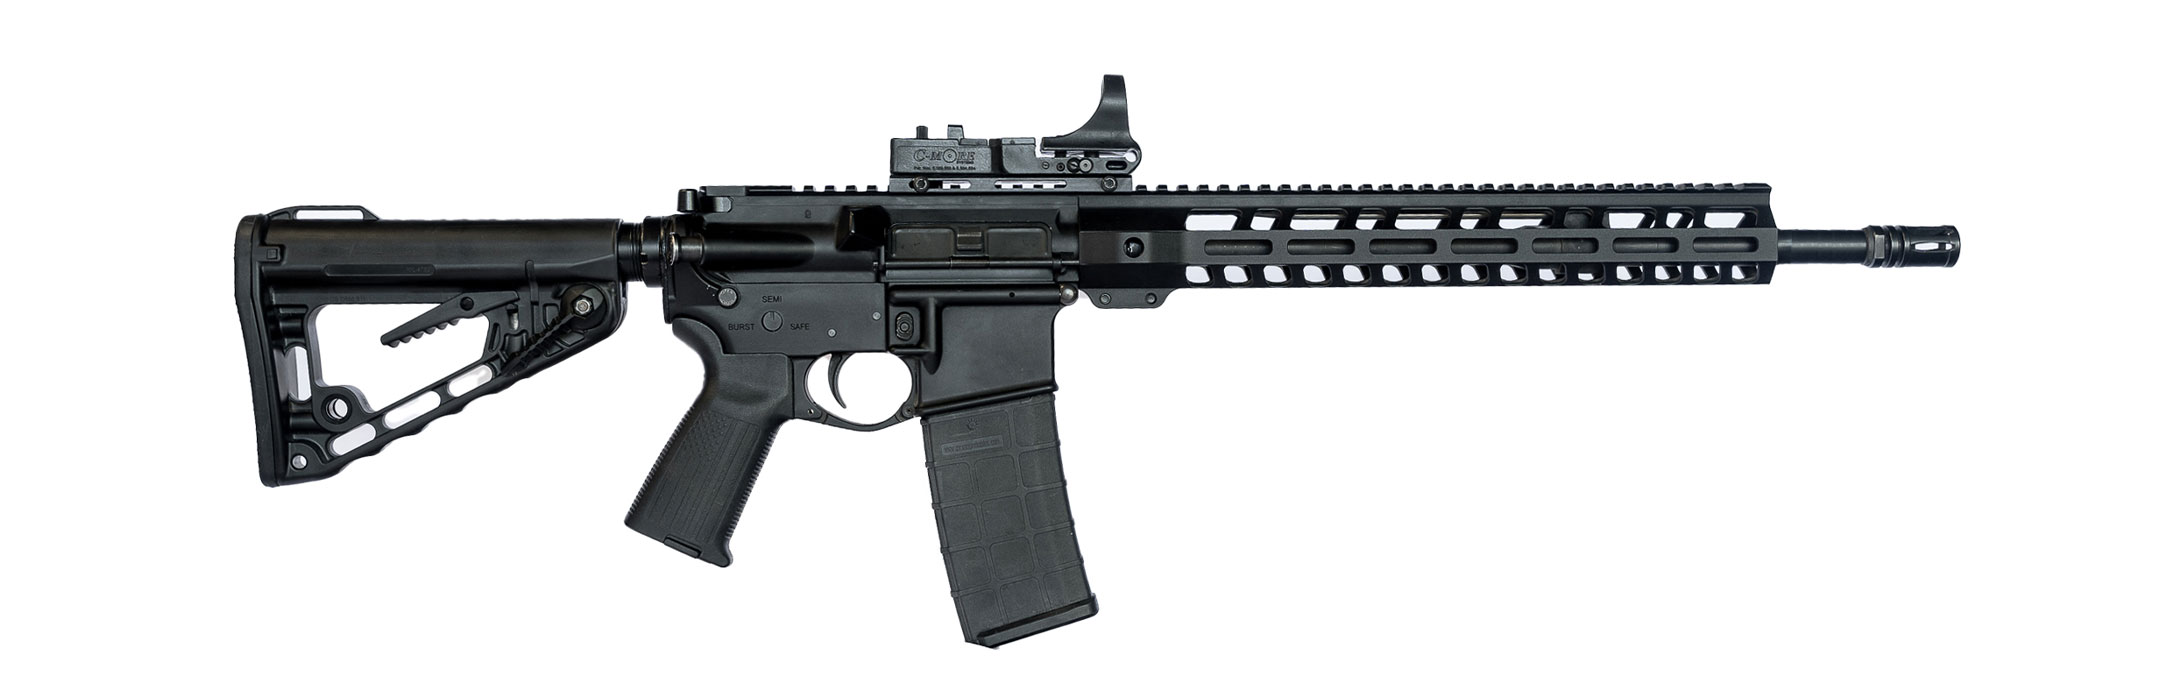 AR-15 with Red Dot Optic 5.56 Semi-Auto Rifle (code R020)-image